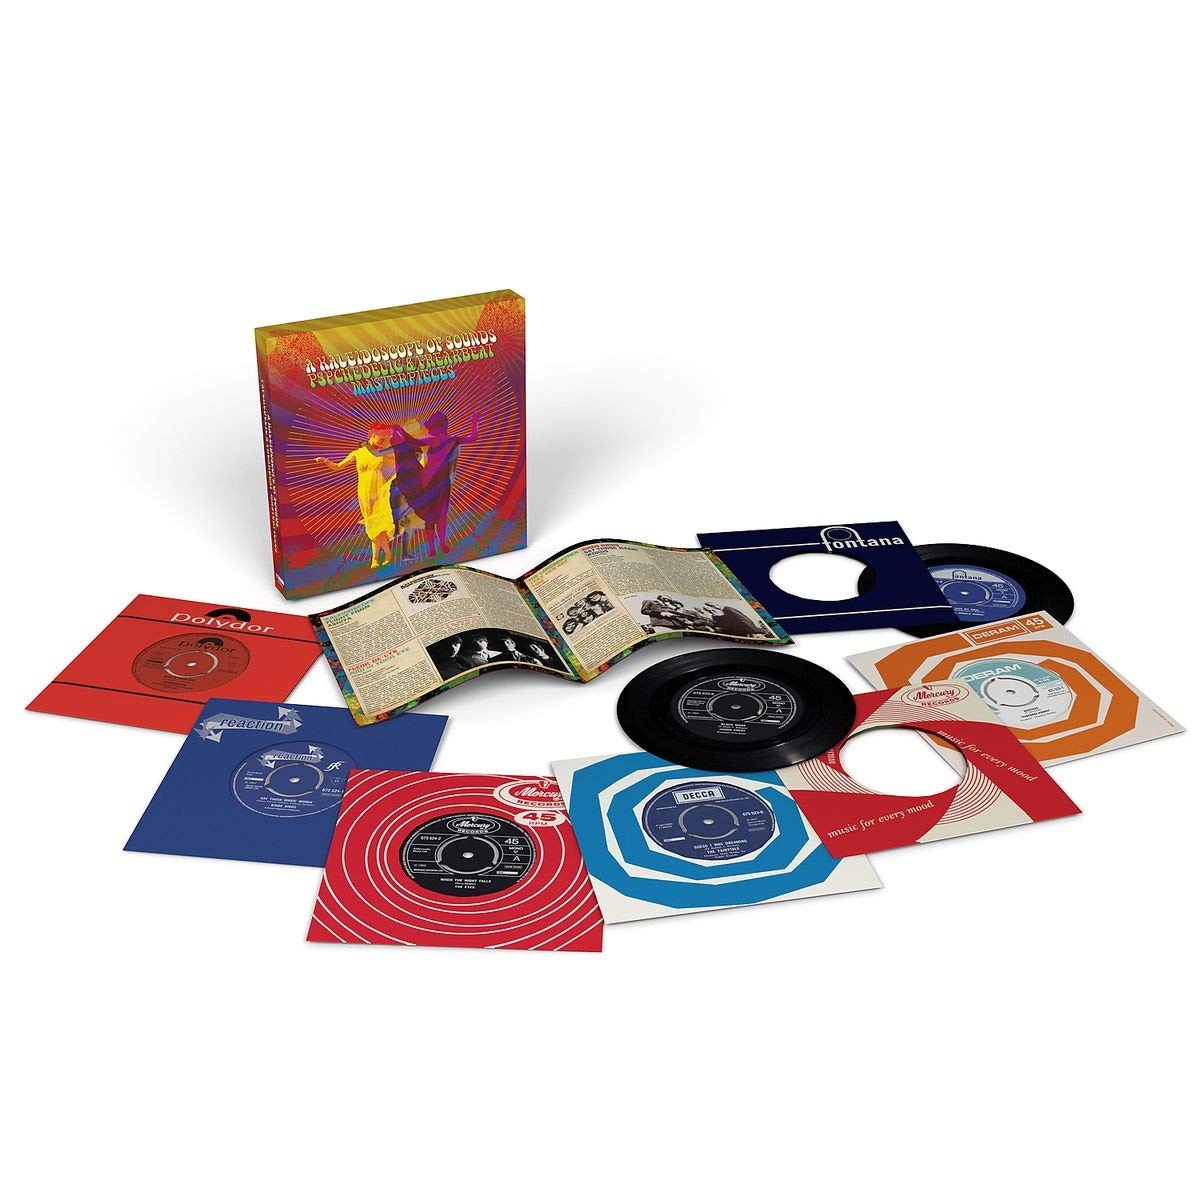 V.A. (PSYCHE) / A KALEIDOSCOPE OF SOUNDS (PSYCHEDELIC & FREAKBEAT MASTERPIECES) (7X7" BOX)